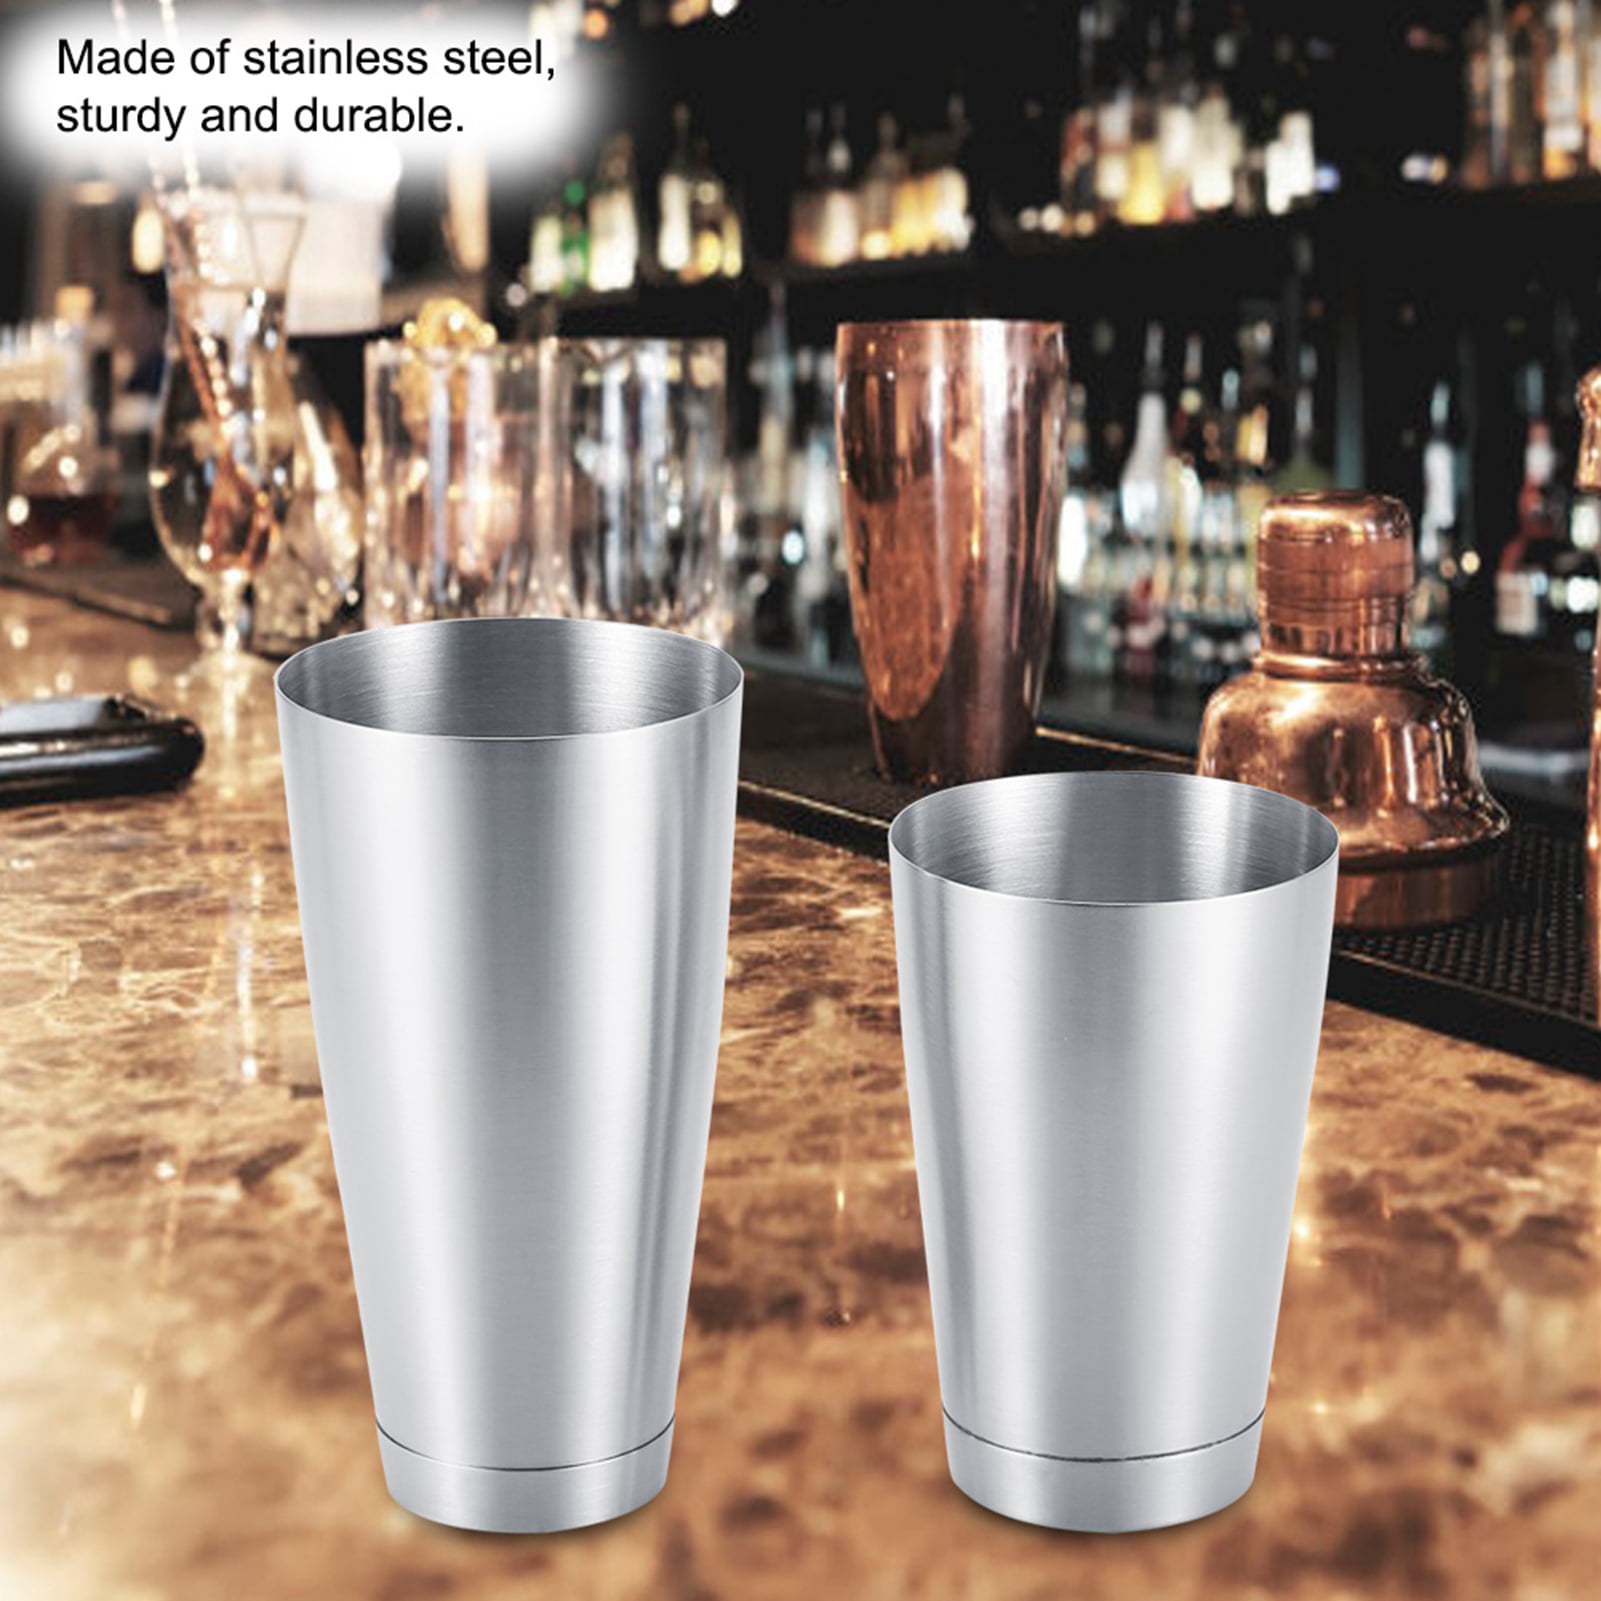 Stainless Steel Boston Wine Mixer Set With Hand Shaker Bartender Cocktail  Shaker Bar Set For Kitchen, Dining, And Home Garden From Yummy_shop, $17.49